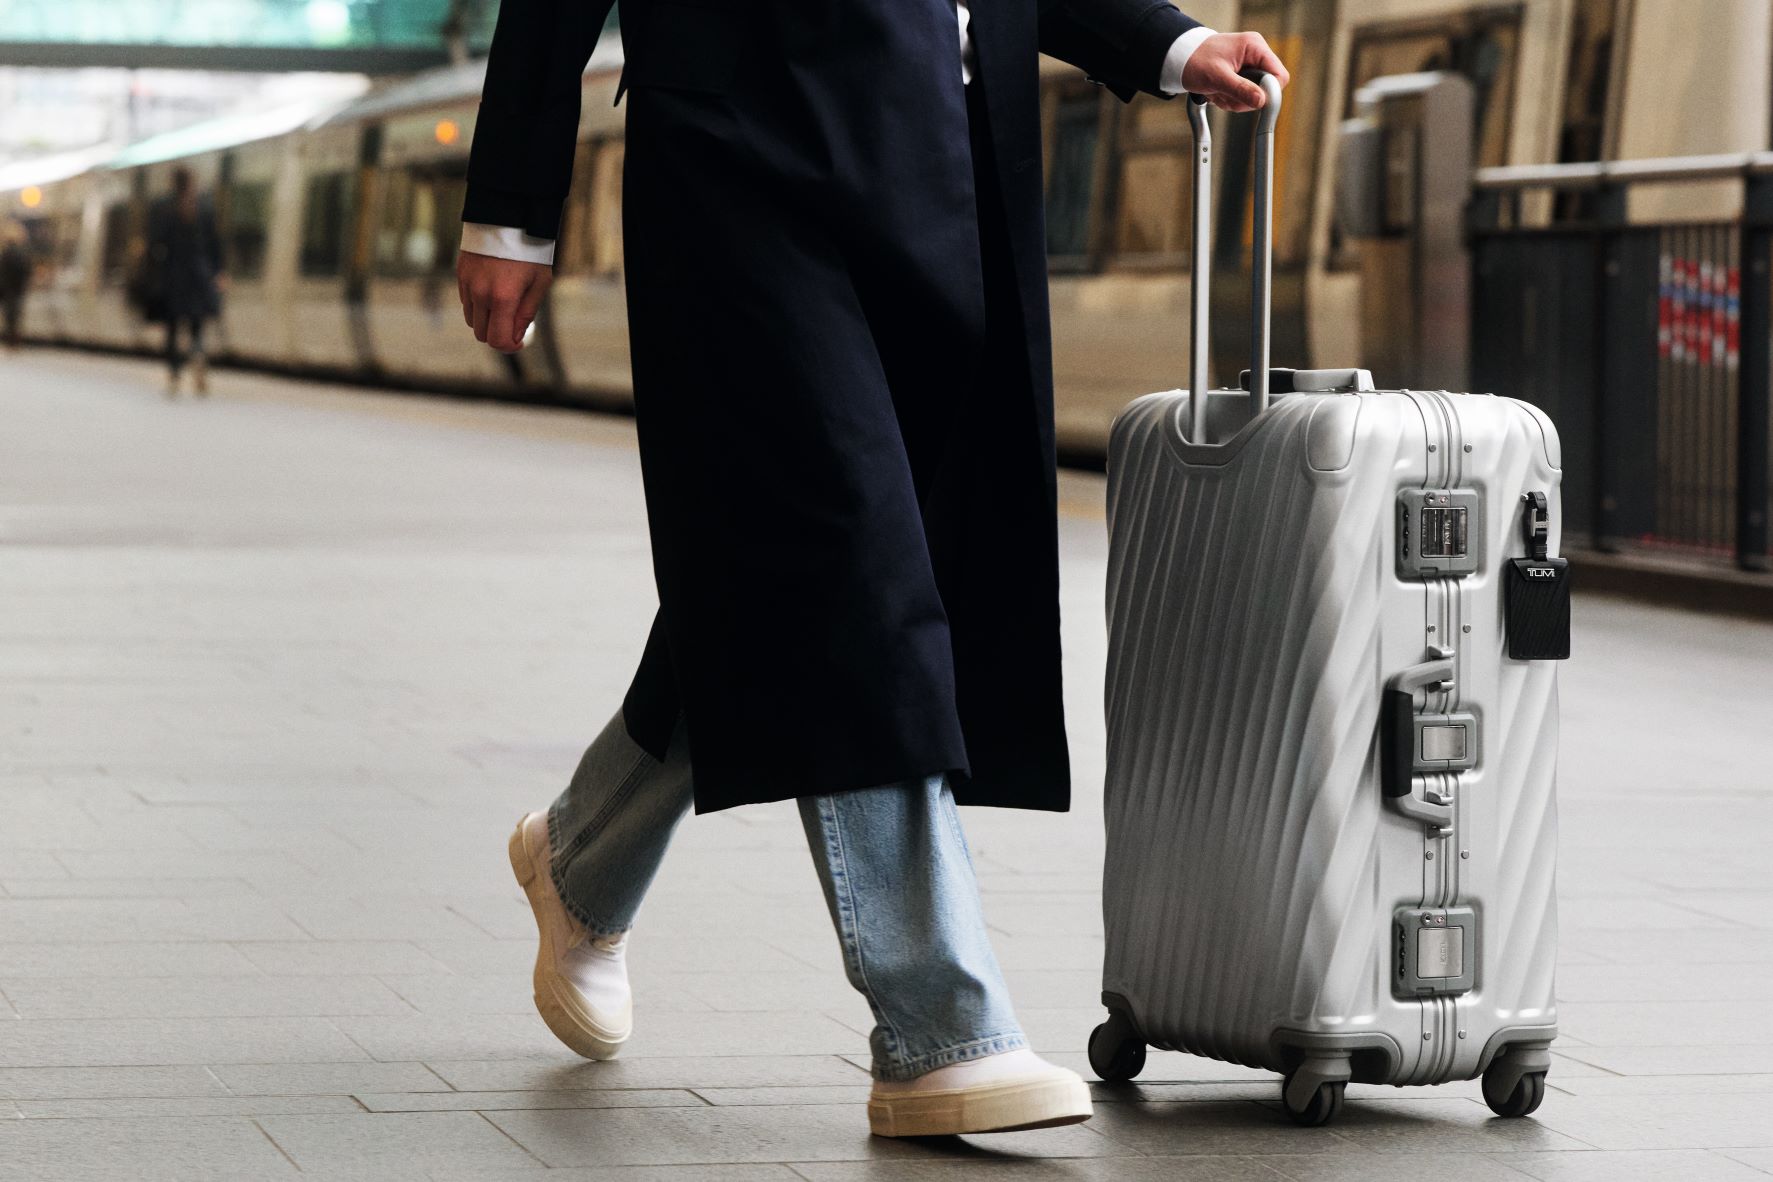 Prepare for the tourist season to restart in 2022 with the tumi 19-degree suitcase